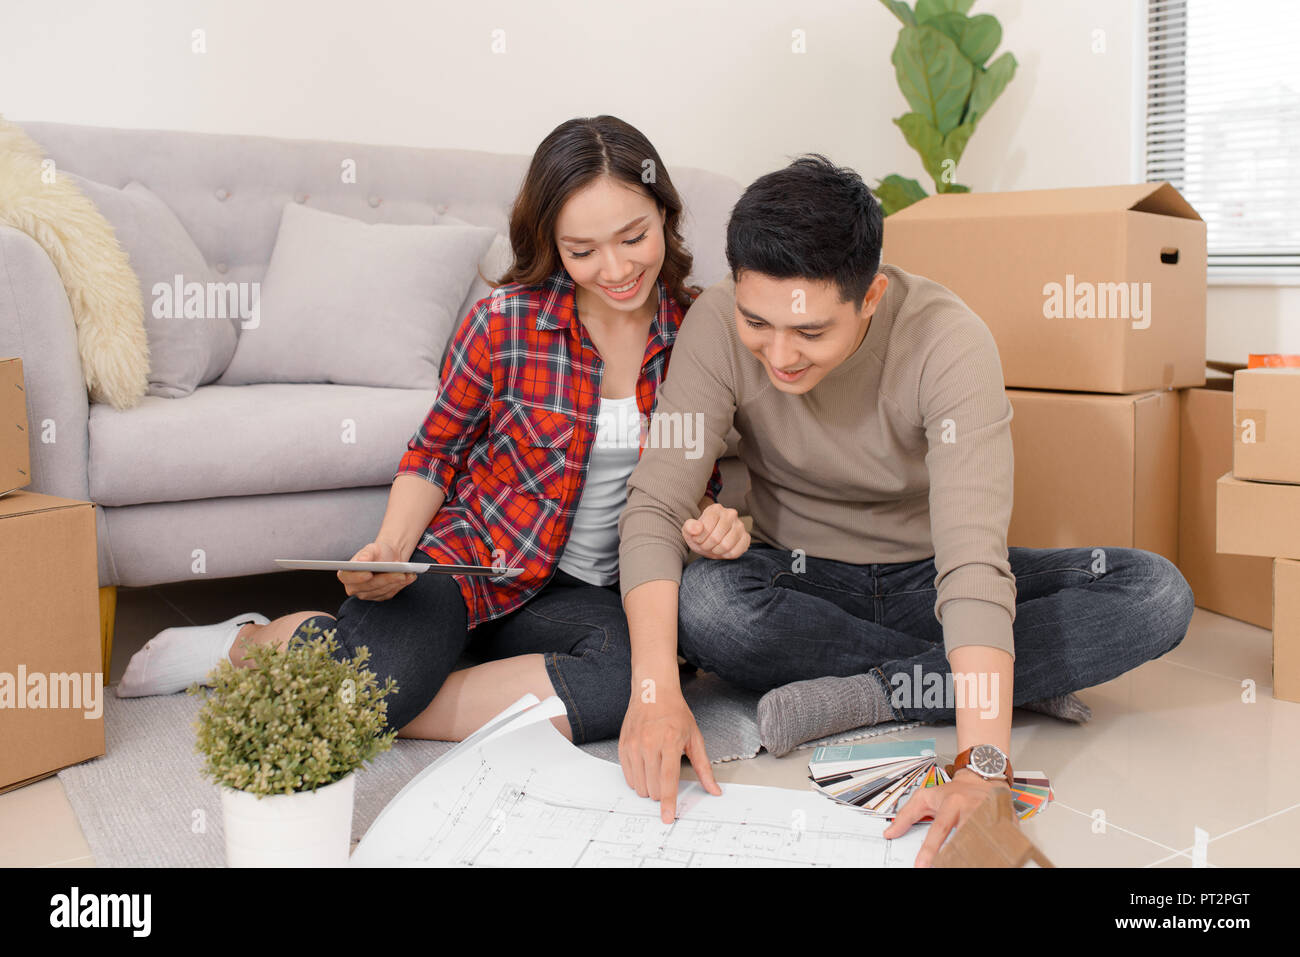 Happy young couple looking at blueprint planning new home interior design settling in, homeowners talking about remodeling ideas, discussing house arc Stock Photo